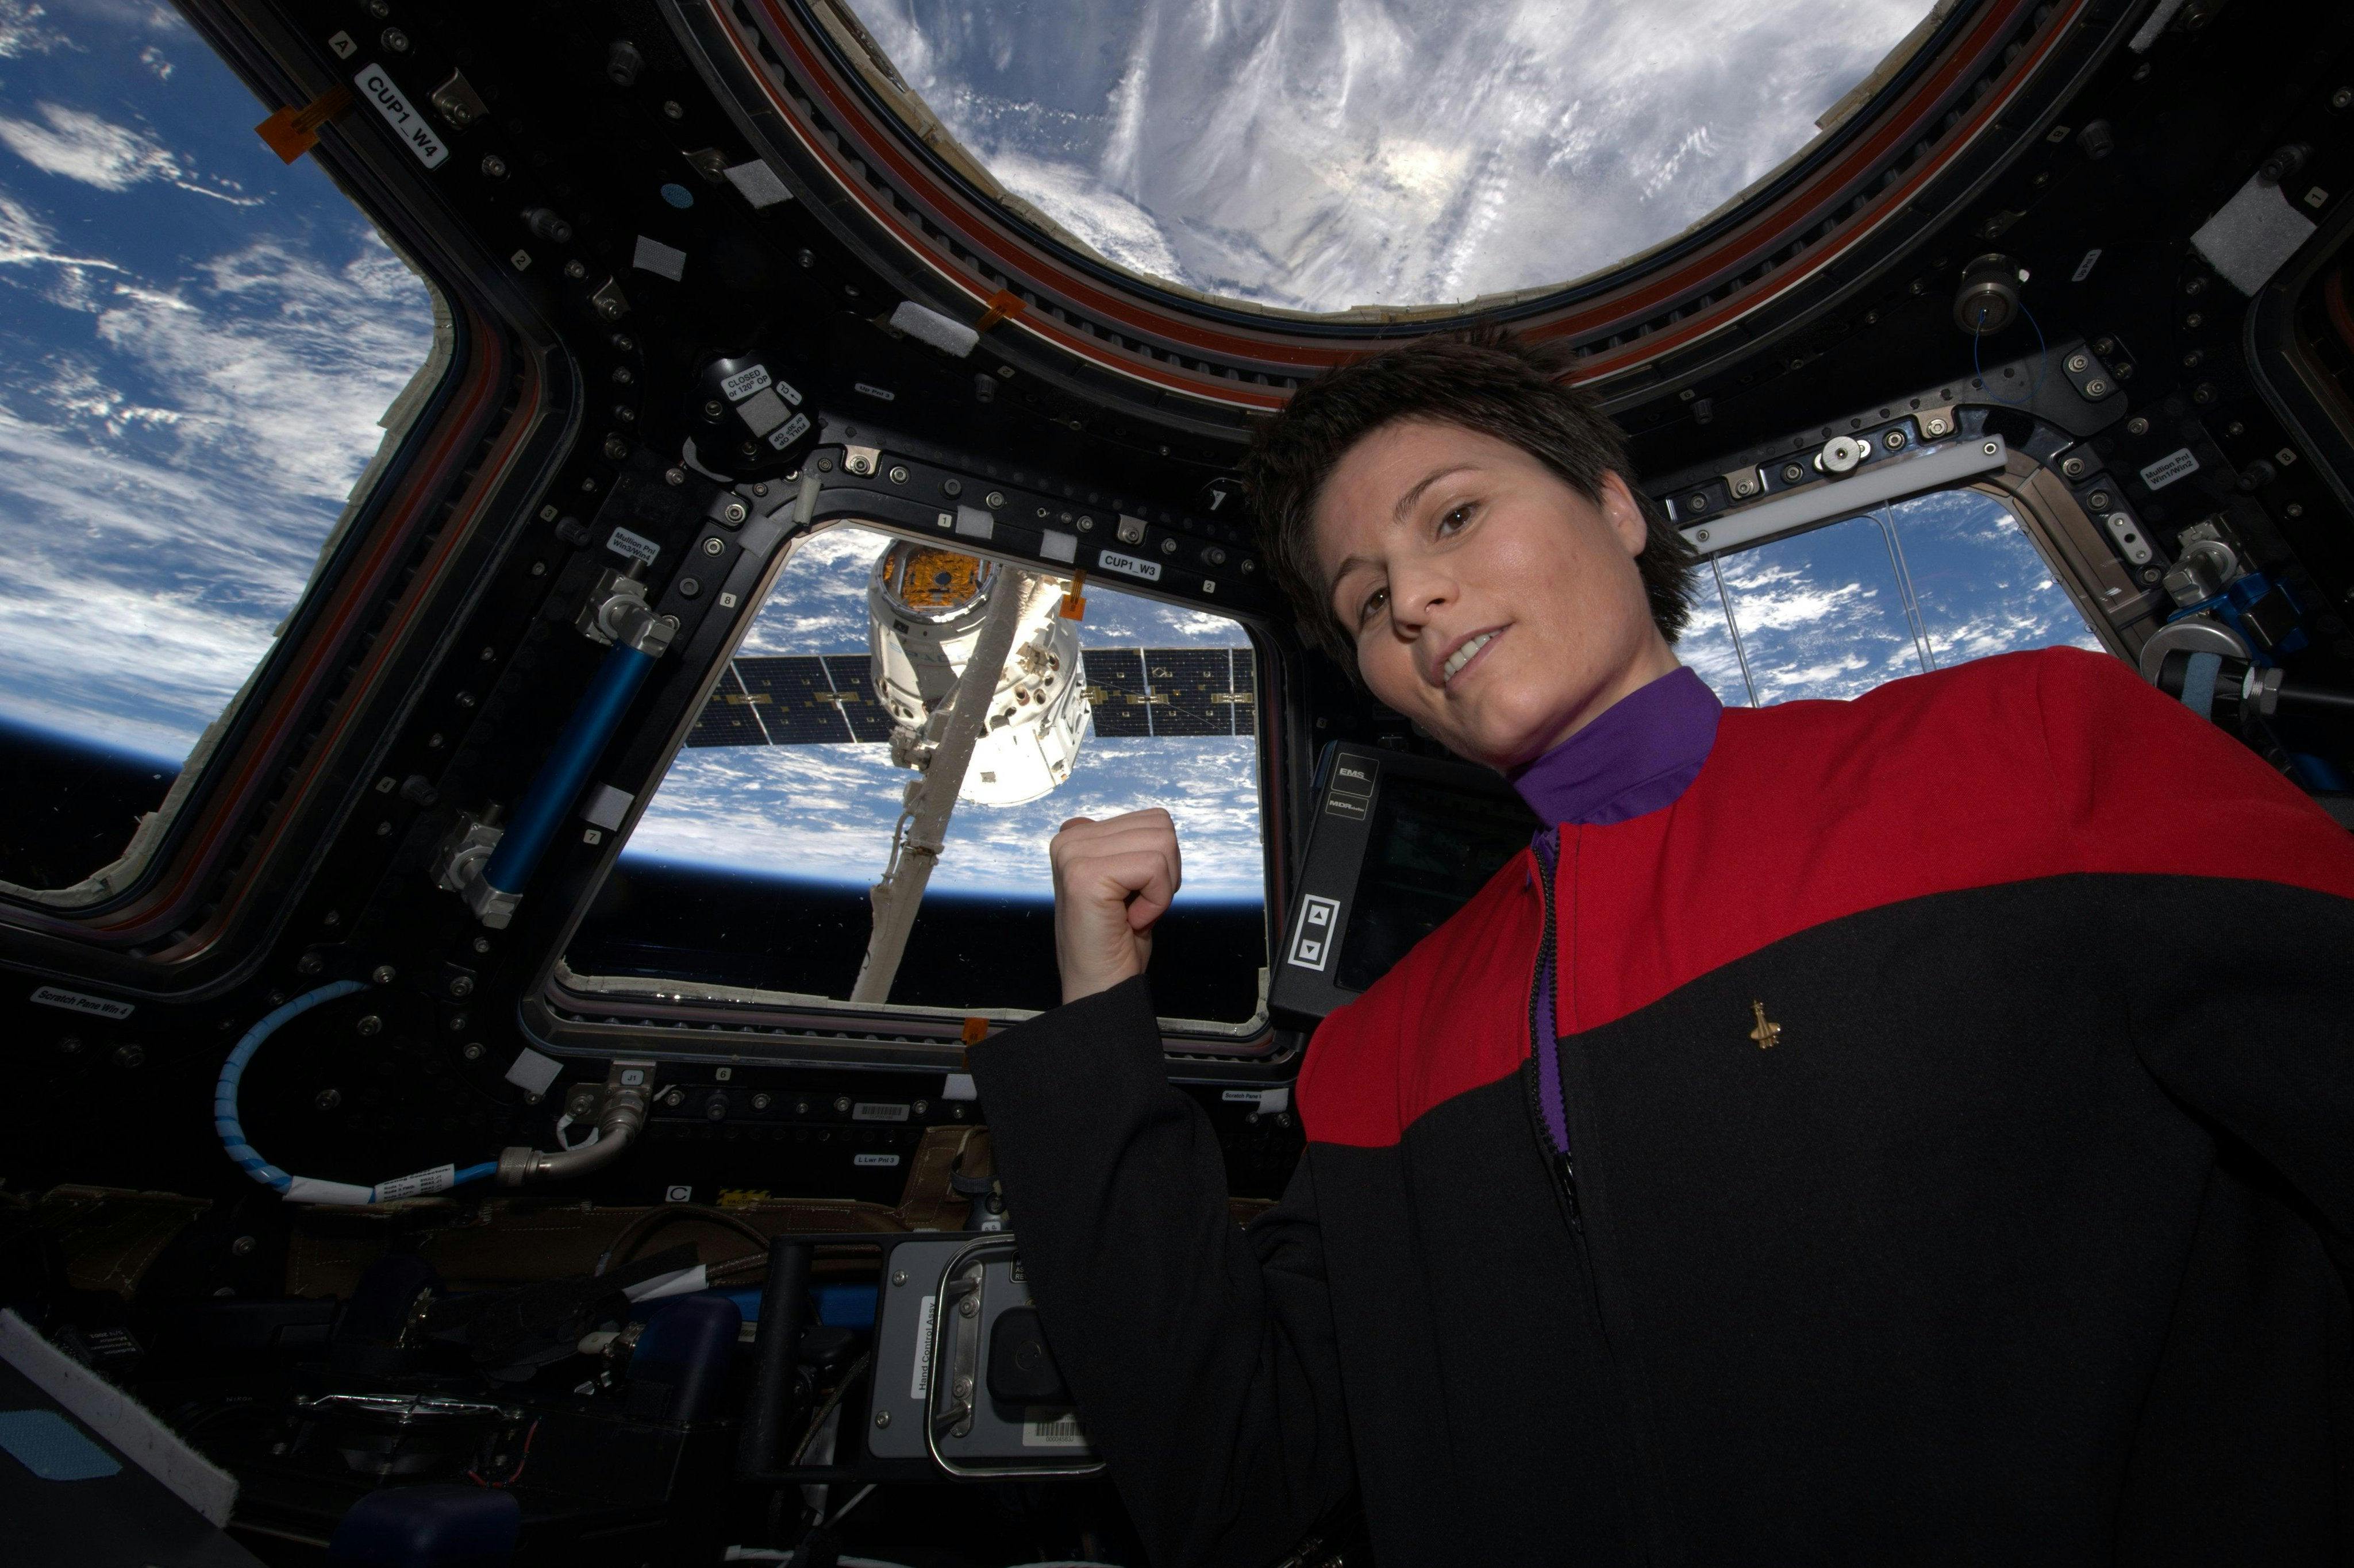 Italian astronaut Samantha Cristoforetti cosplays as coffee-enthusiast Captain Kathryn Janeway in the International Space Station, waiting for coffee delivery from the Space X Dragon cargo spacecraft.